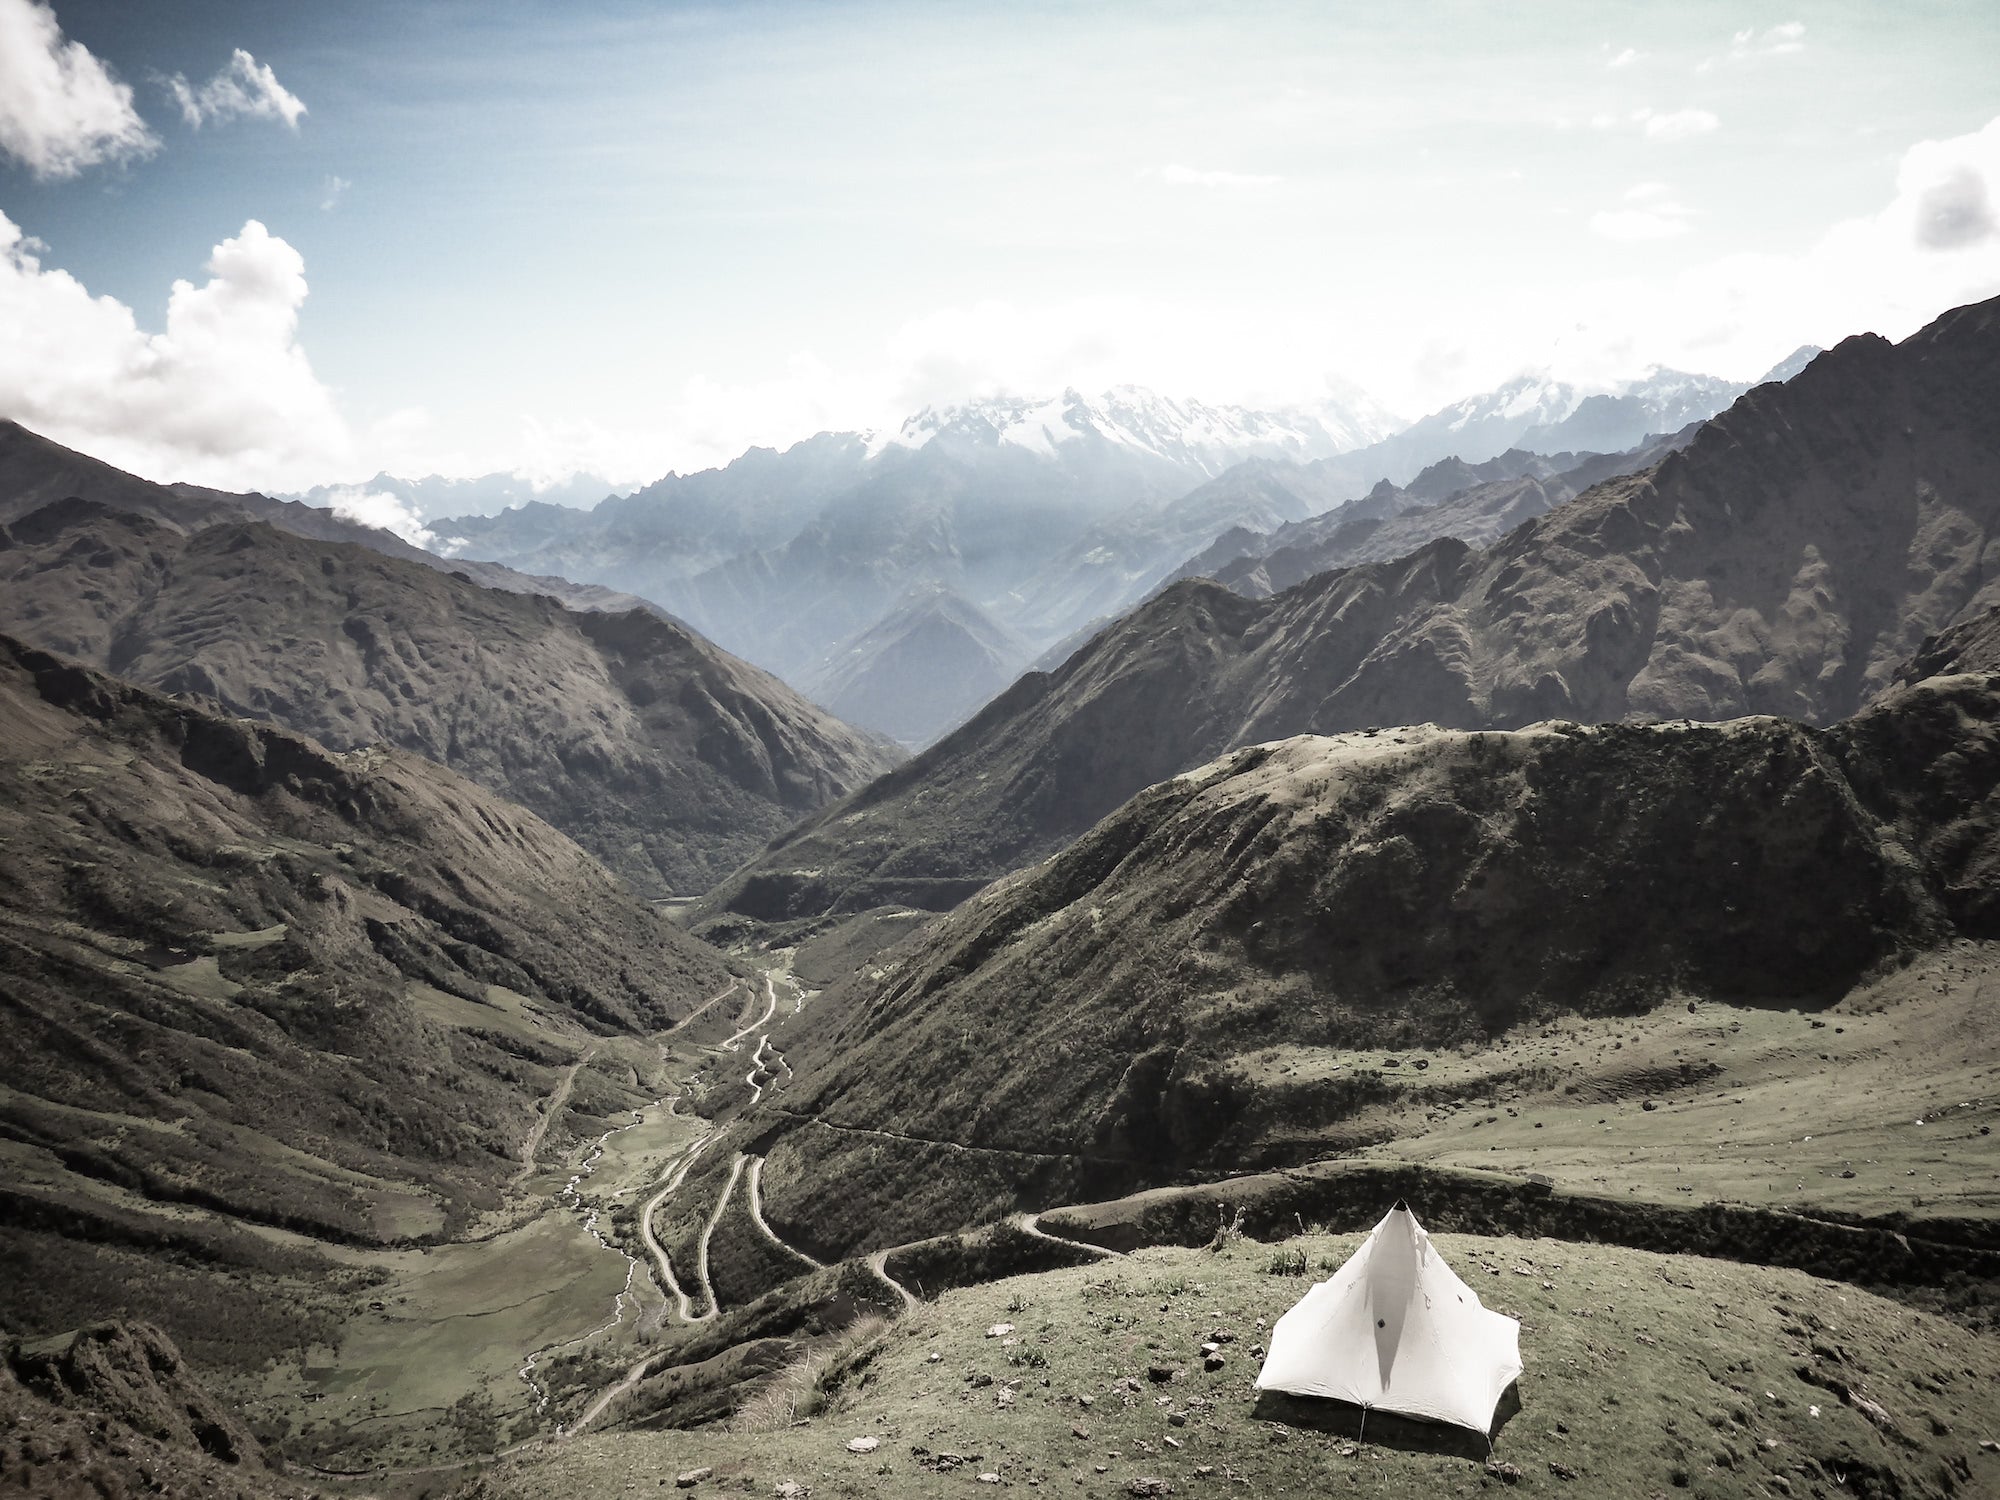 Ultralight tent pitched overlooking a valley